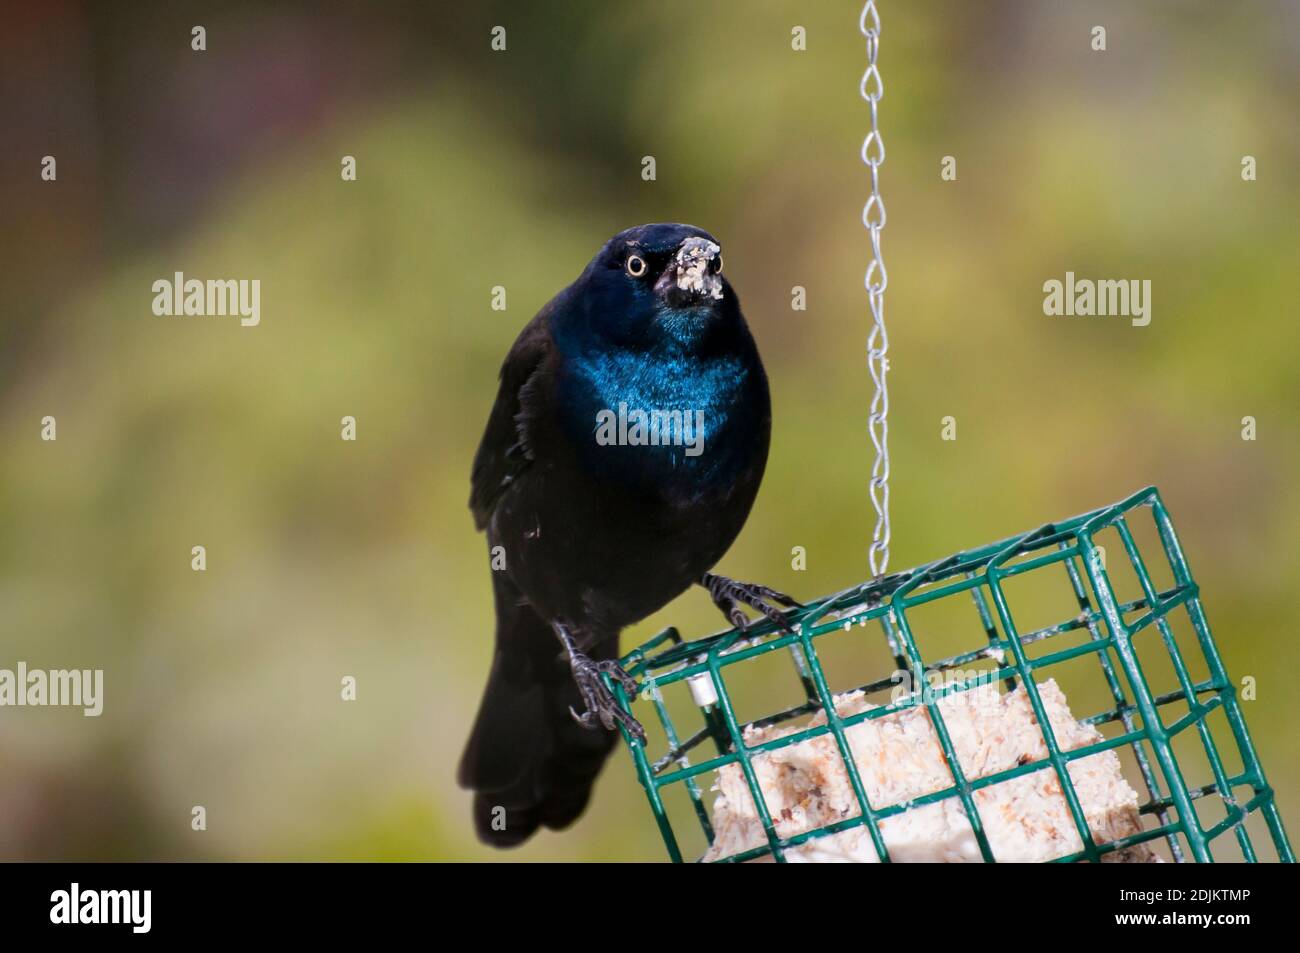 Vadnais heights, Minnesota. Male Common Grackle, Quiscalus quiscula eating from a suet feeder for birds. Stock Photo